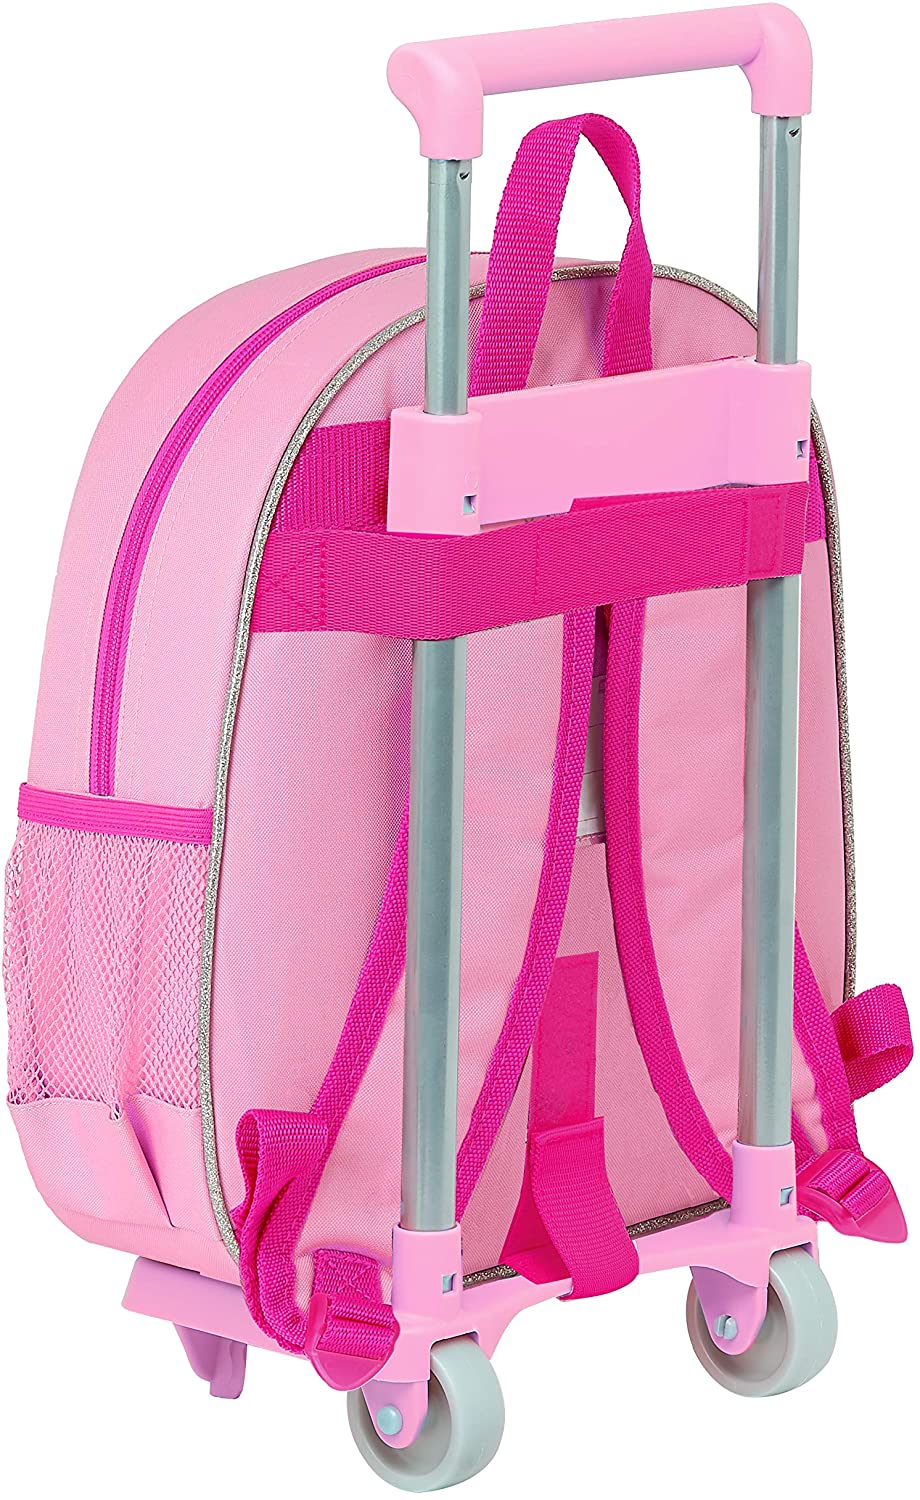 Backpack with 3D Design and Princess Safta 705, 270 x 100 x 320 mm